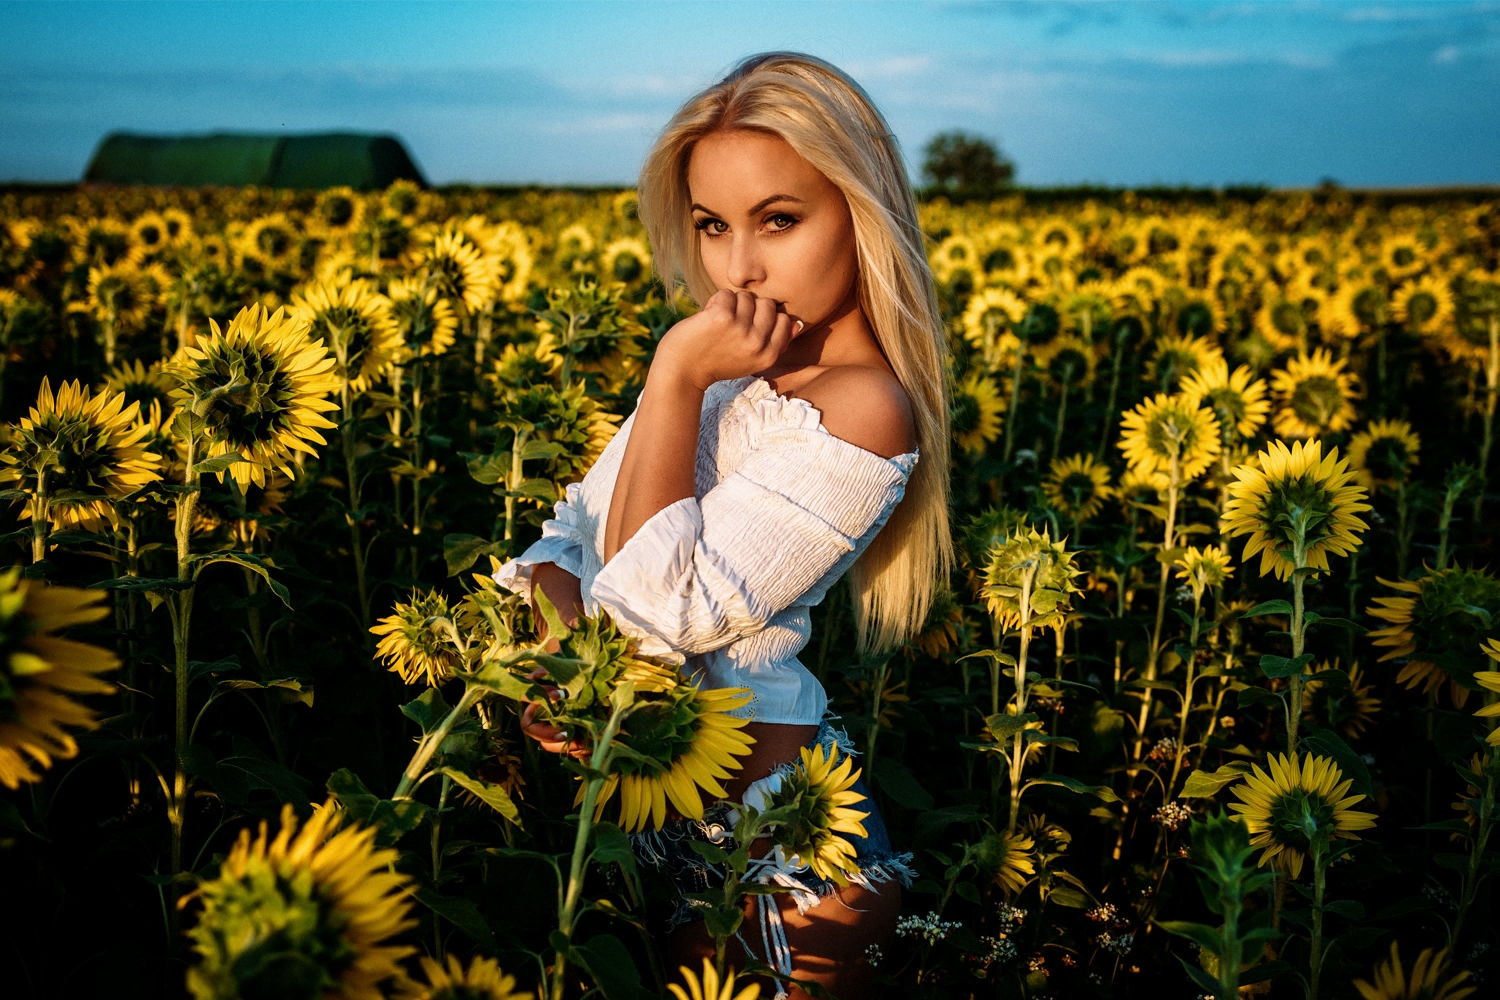 Women Blonde Model Outdoors Portrait Looking At Viewer Bare Shoulders White Tops Sunflowers Yellow F 1500x1000